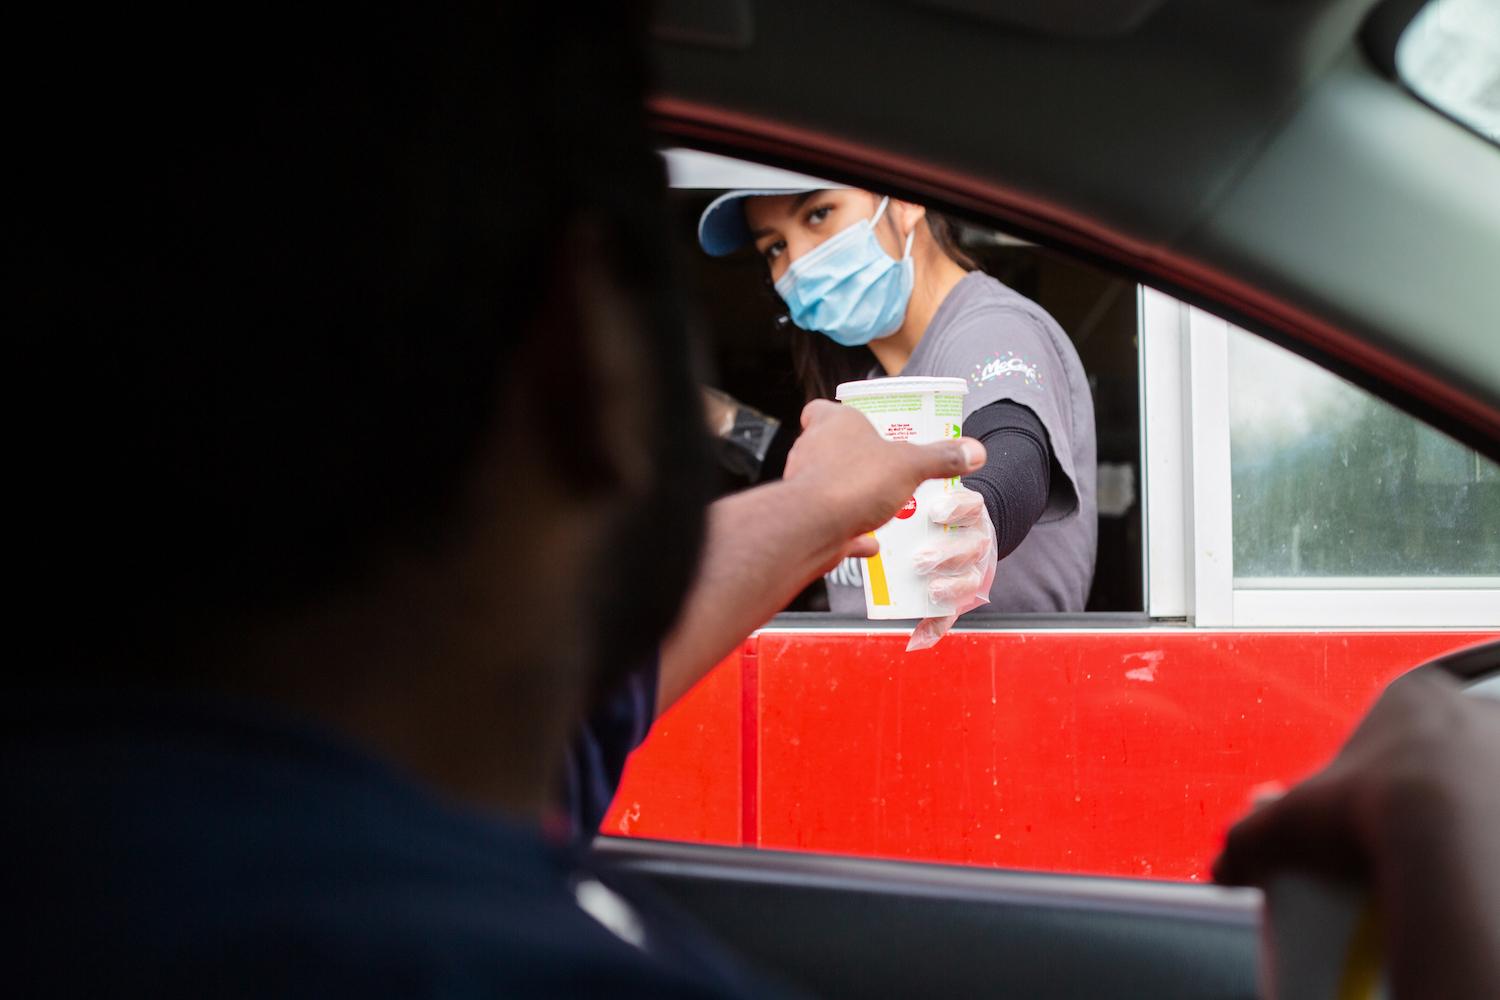 A man reaches for his food at the McDonalds drive-thru window as the employee wears a mask for protection - May 17, 2020.